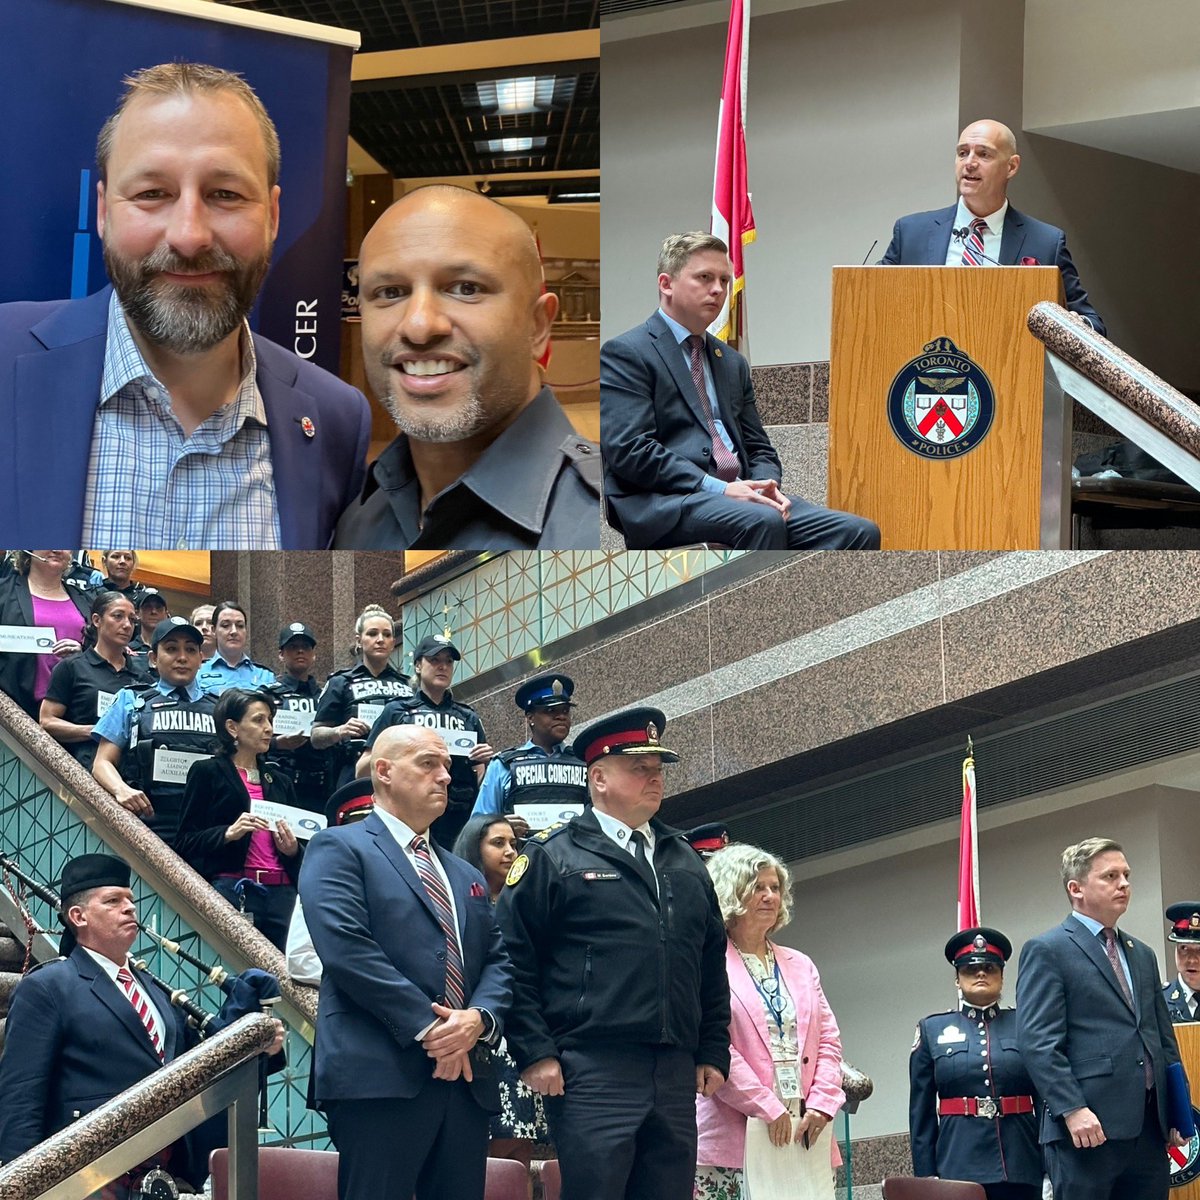 Great kickoff @TorontoPolice Police Week at HQ this morning w/ the theme of Join Policing: Keep Ontario Safe.  Also fun to catch-up w/ S/Sgt Mike DeZilva ; we were new recruits together at @TPS31Div 24 yrs ago! @TPS_CPEU @TPAca @TPAReid @mrsmeaghangray @TPSMyronDemkiw @TPSBoard